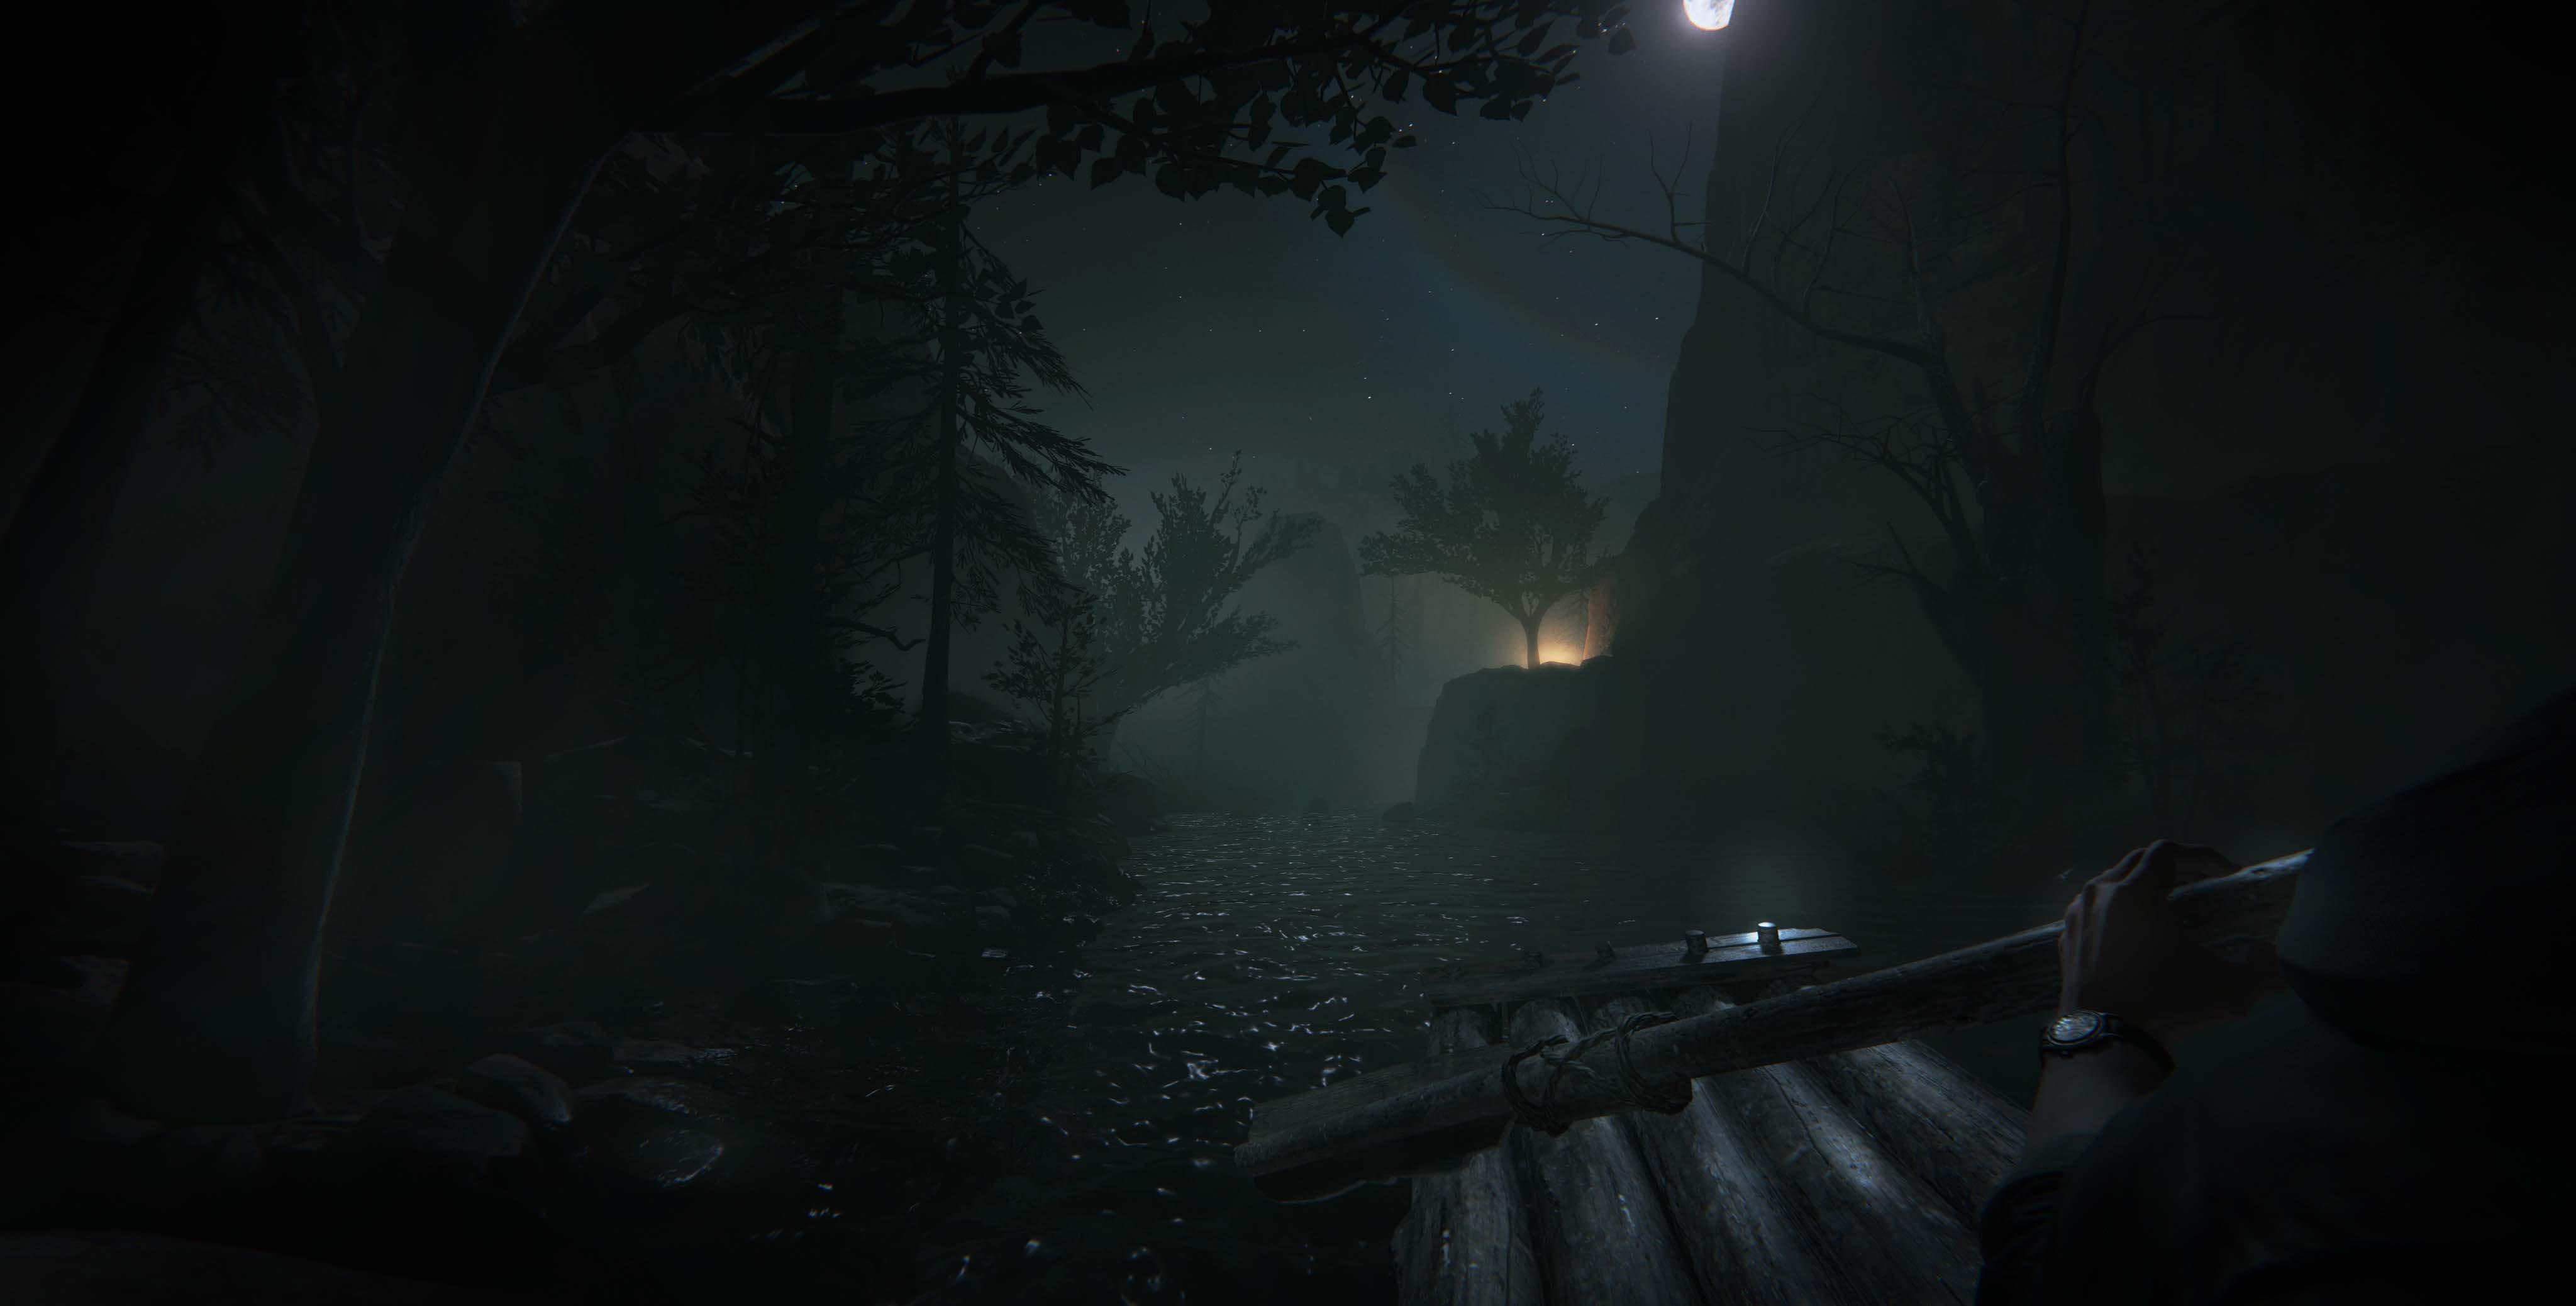 Outlast 2: 4 Details That Connect To The First Game